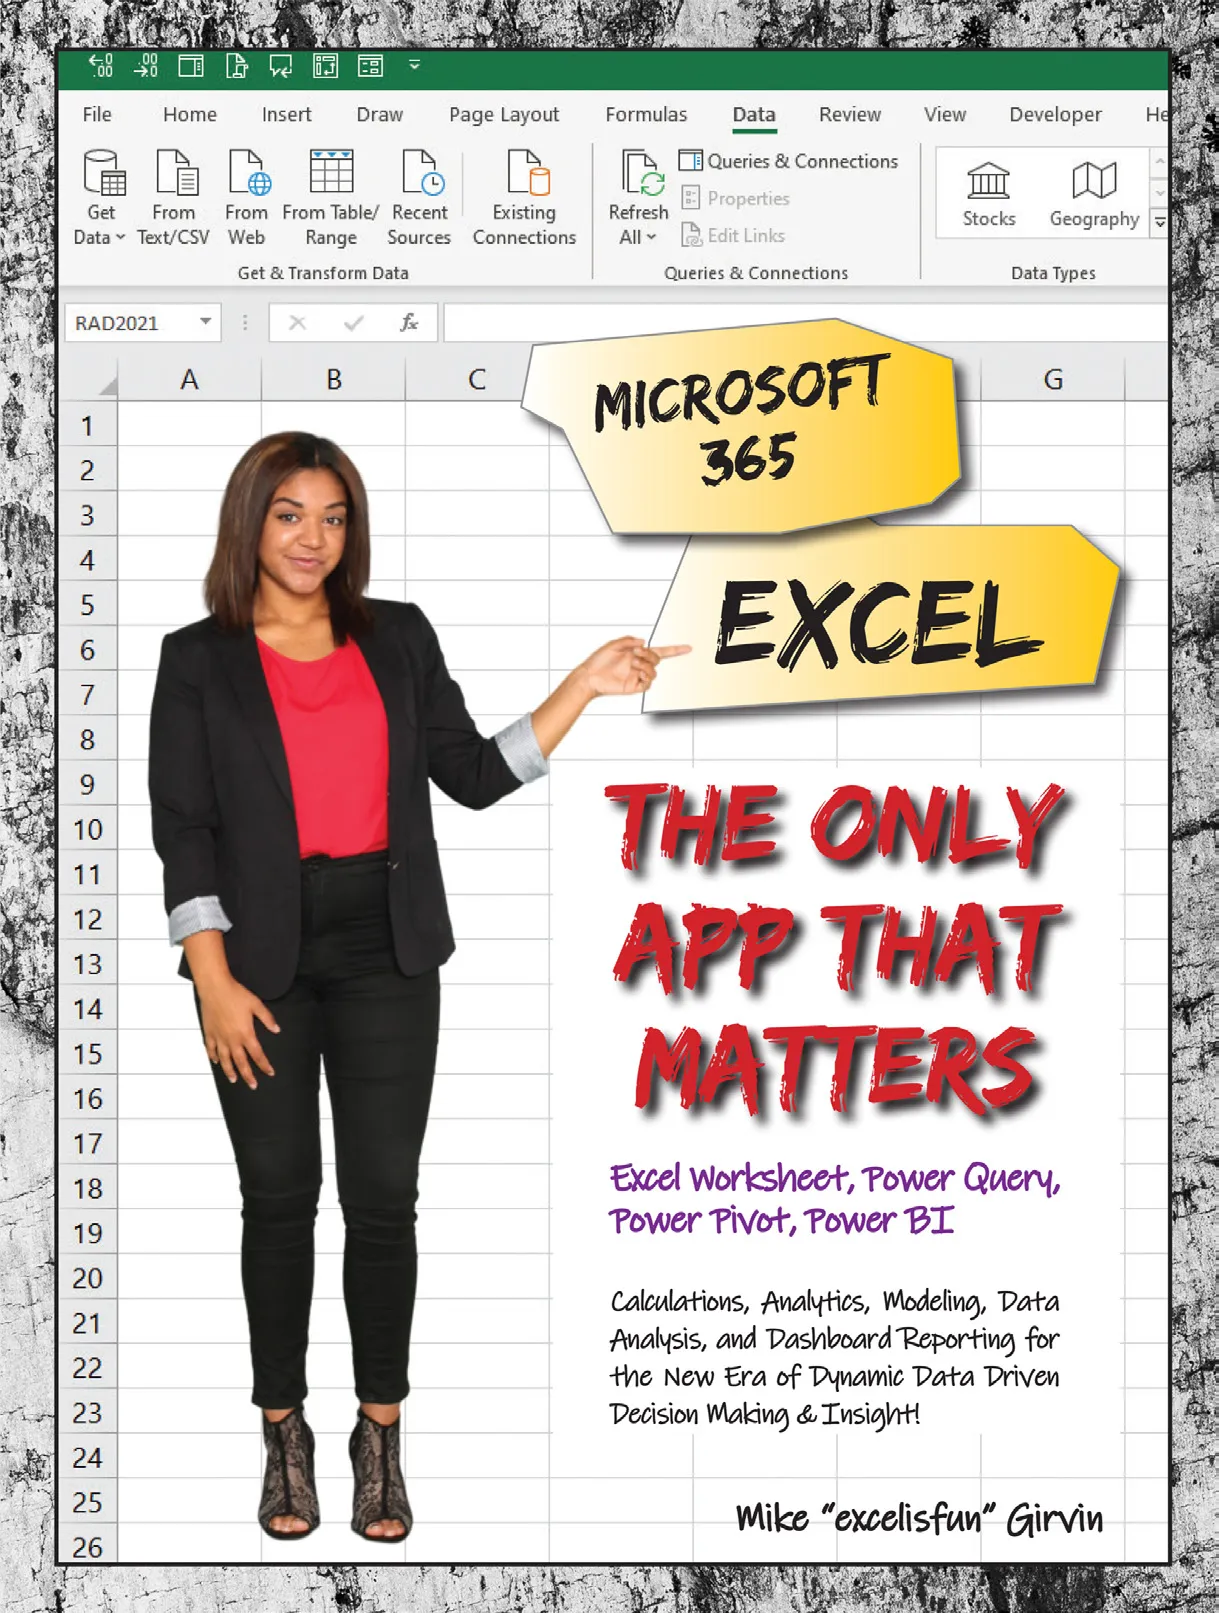 Microsoft 365 - The only app that matters